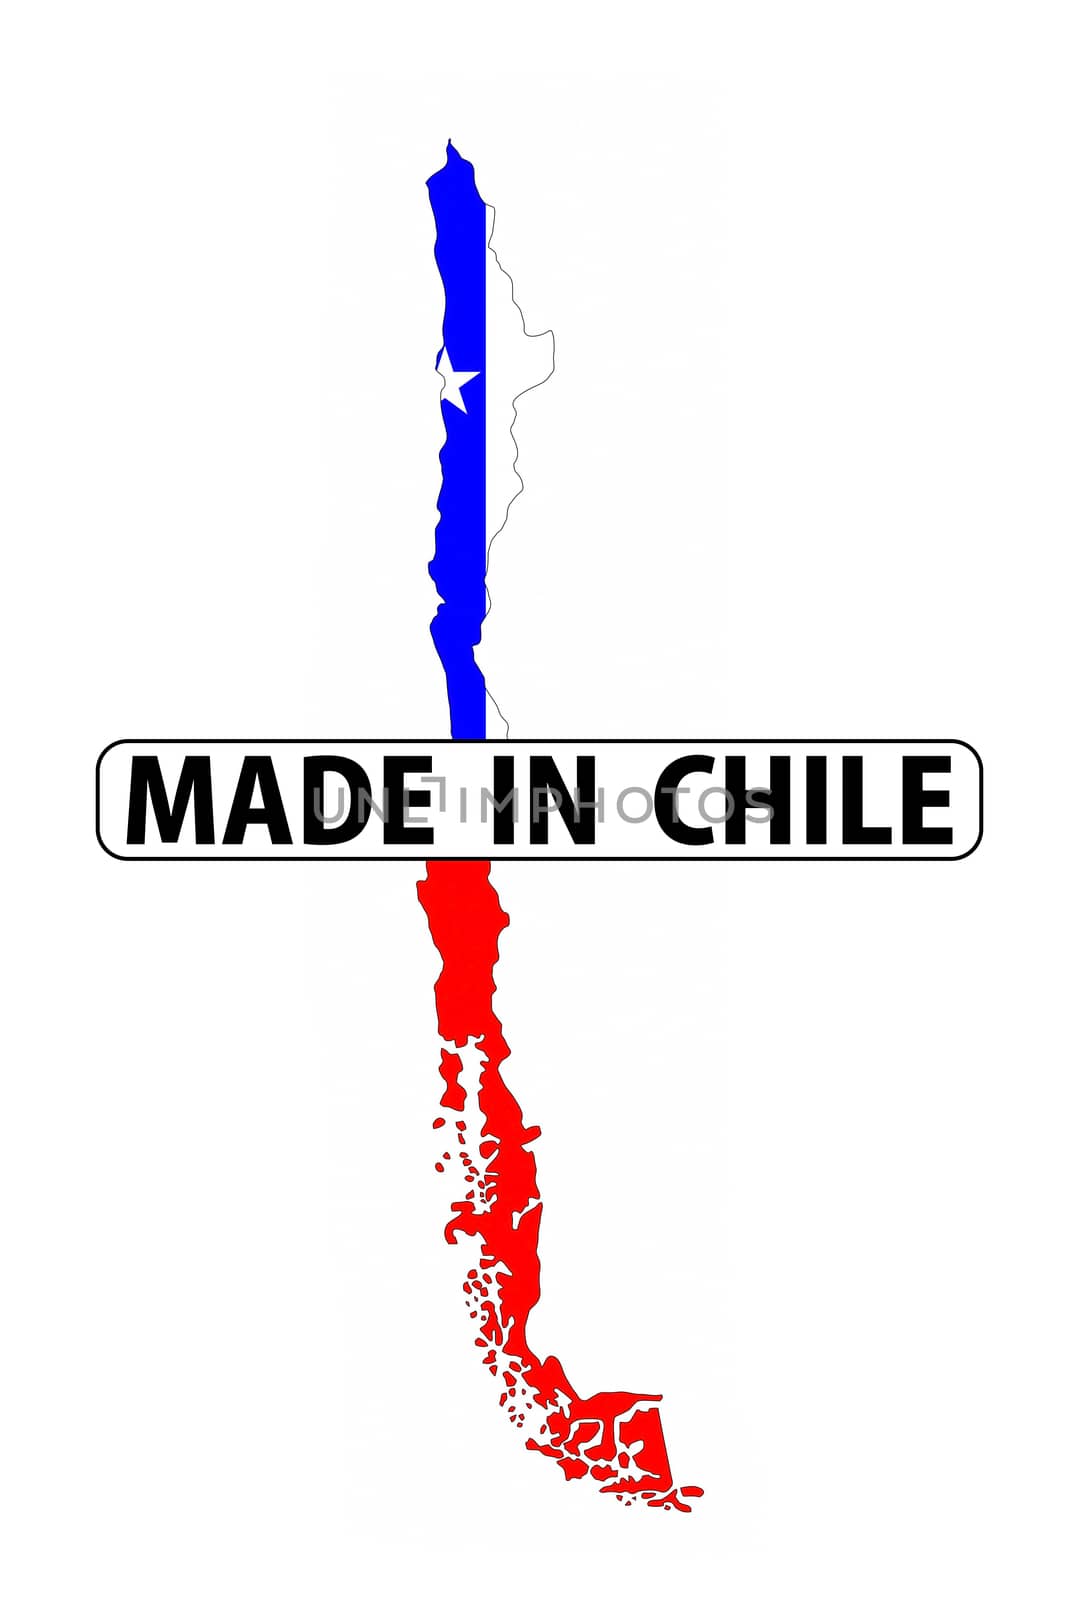 made in chile by tony4urban